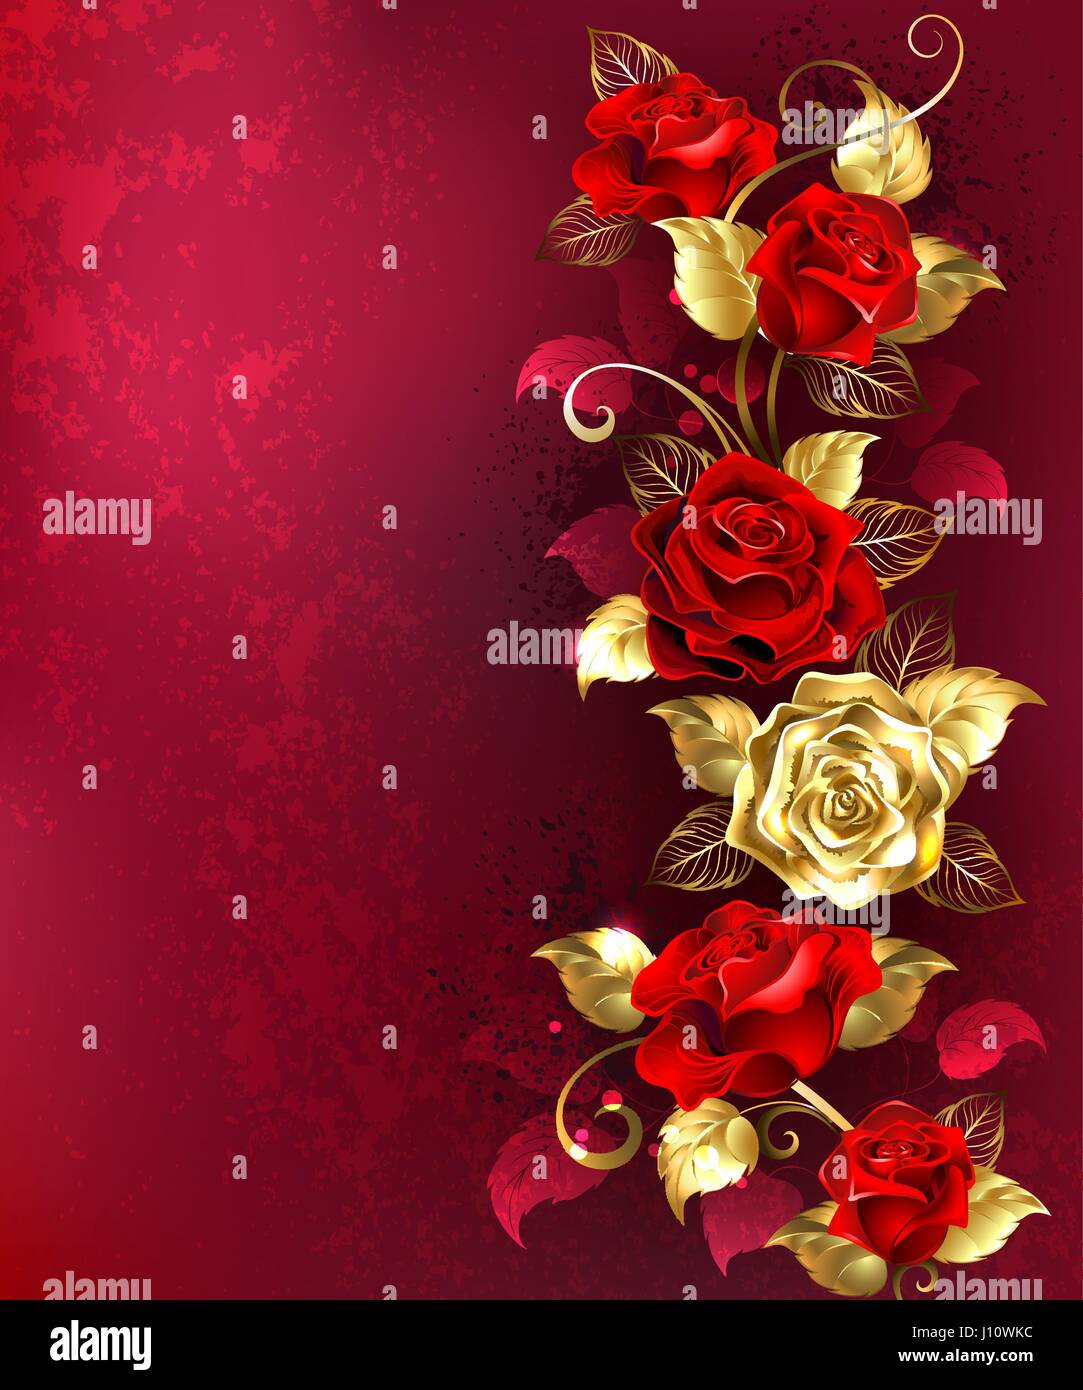 Vertical composition of red and gold jewelry roses with ...